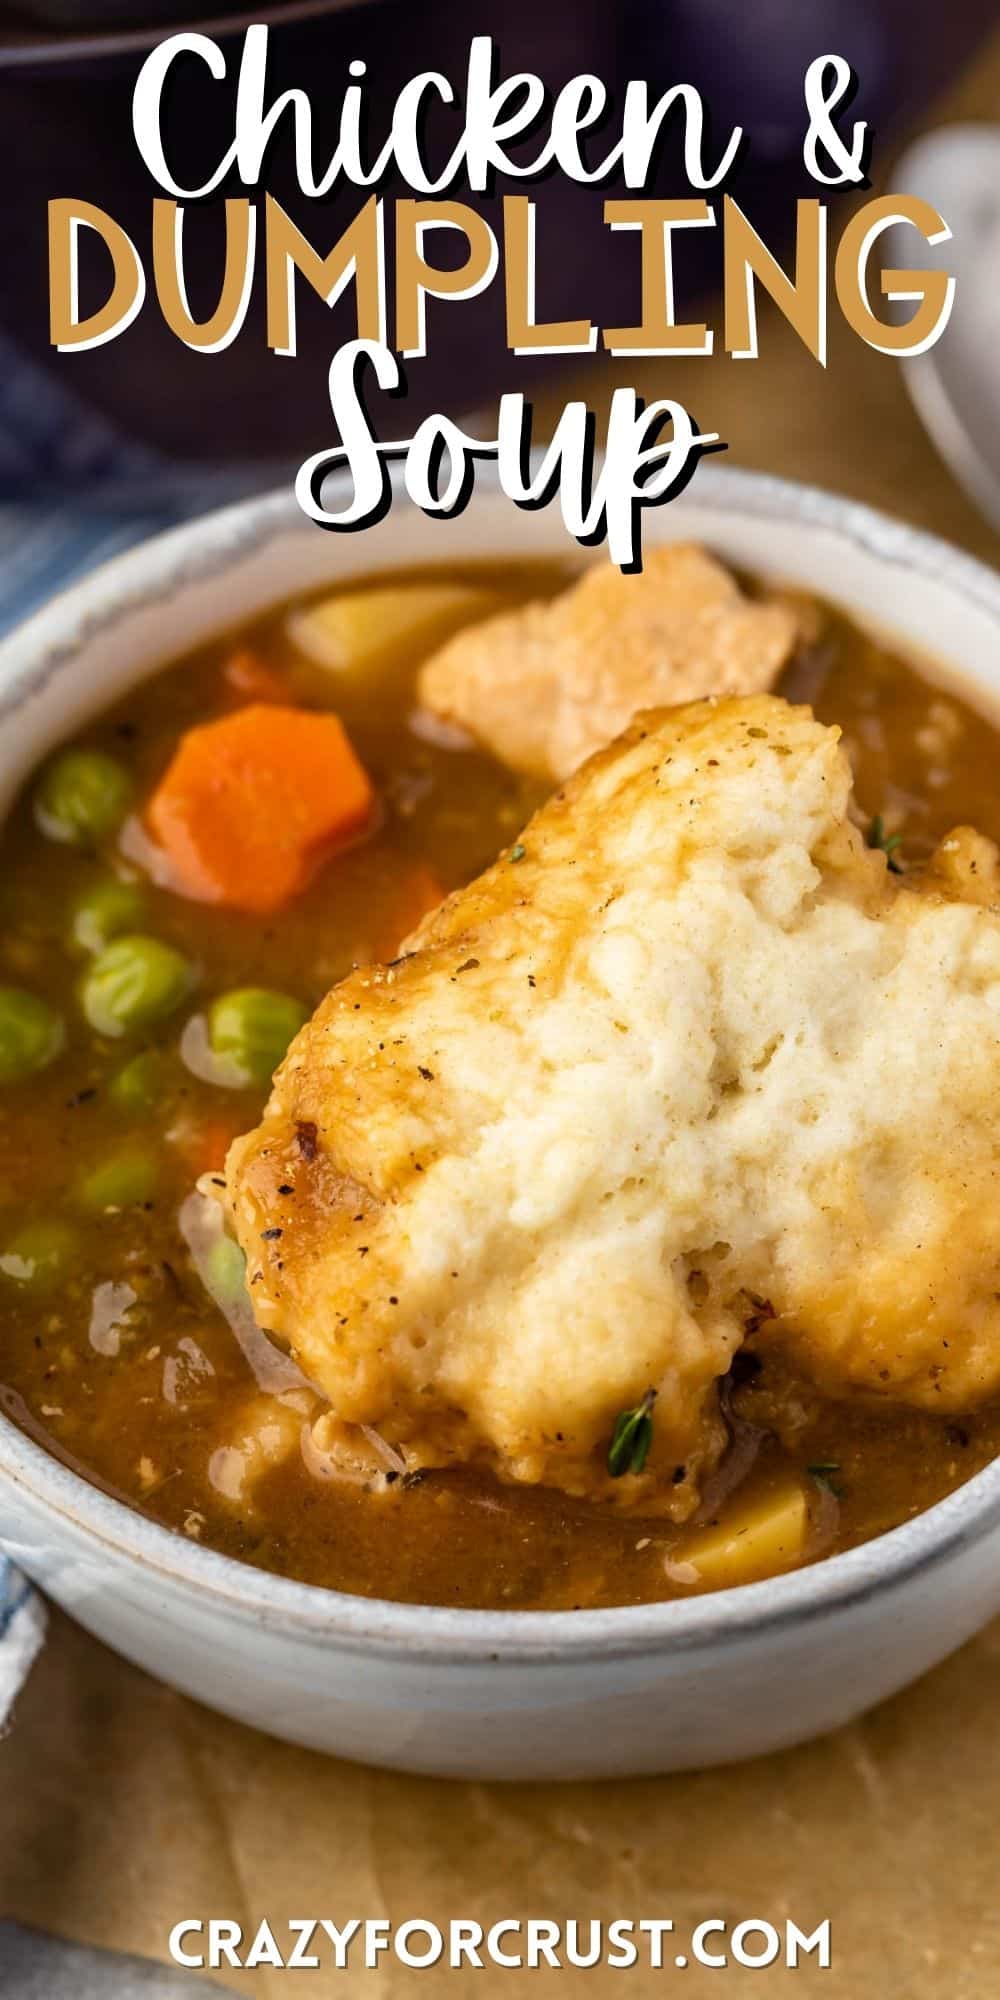 chicken and dumplings in brown soup in a white bowl with words on the image.